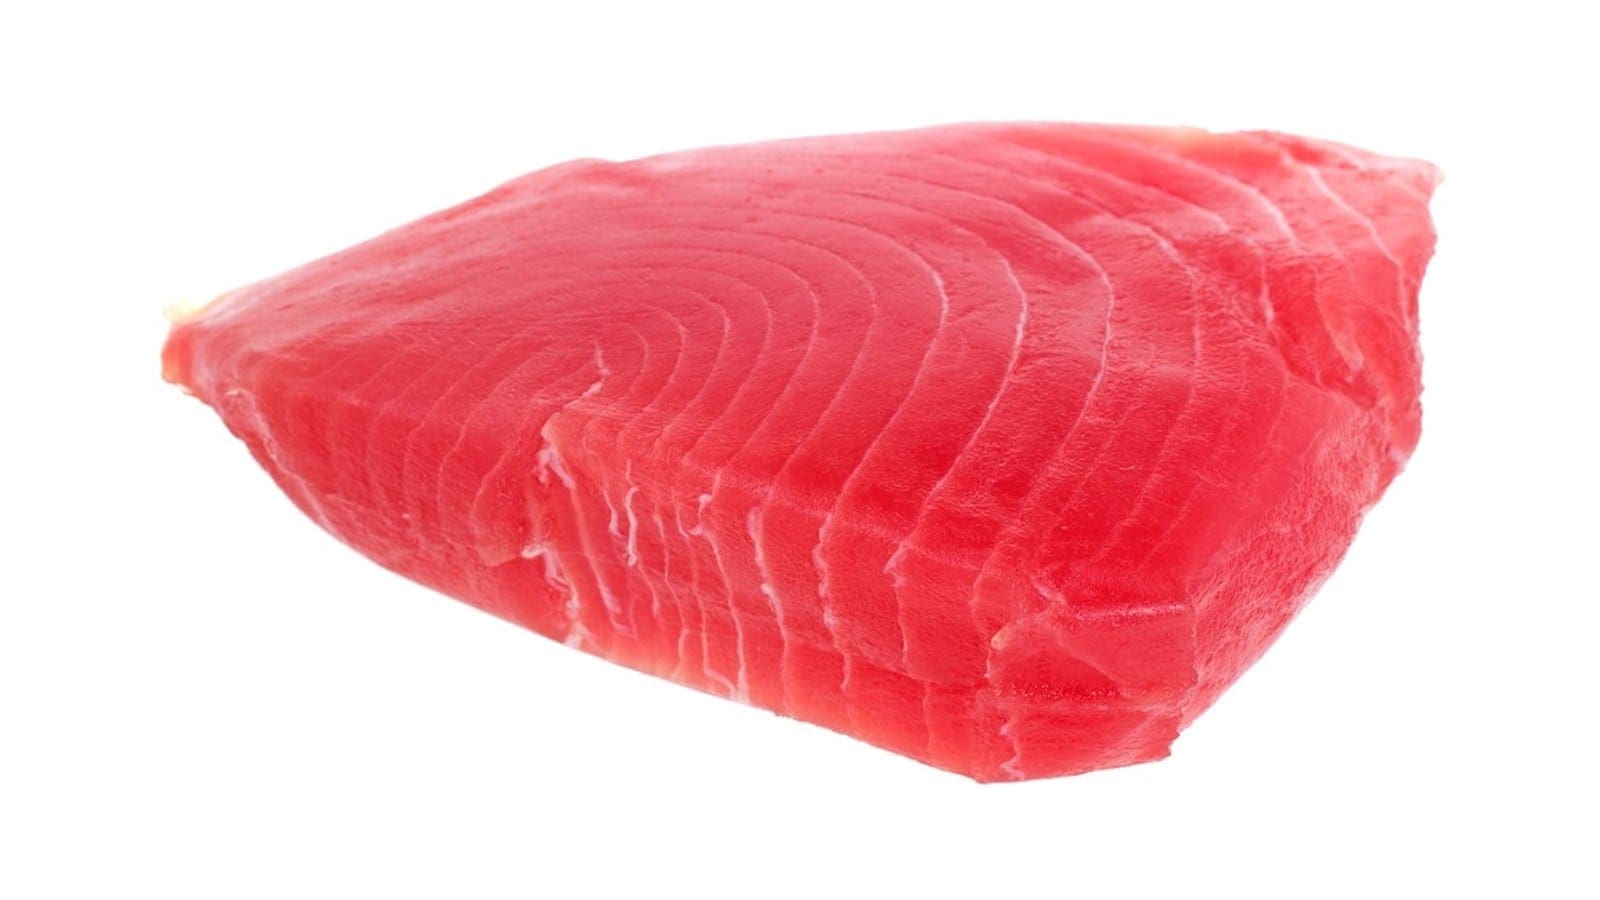 Thawed Yellowfin tuna suspected for foodborne illness in Italy